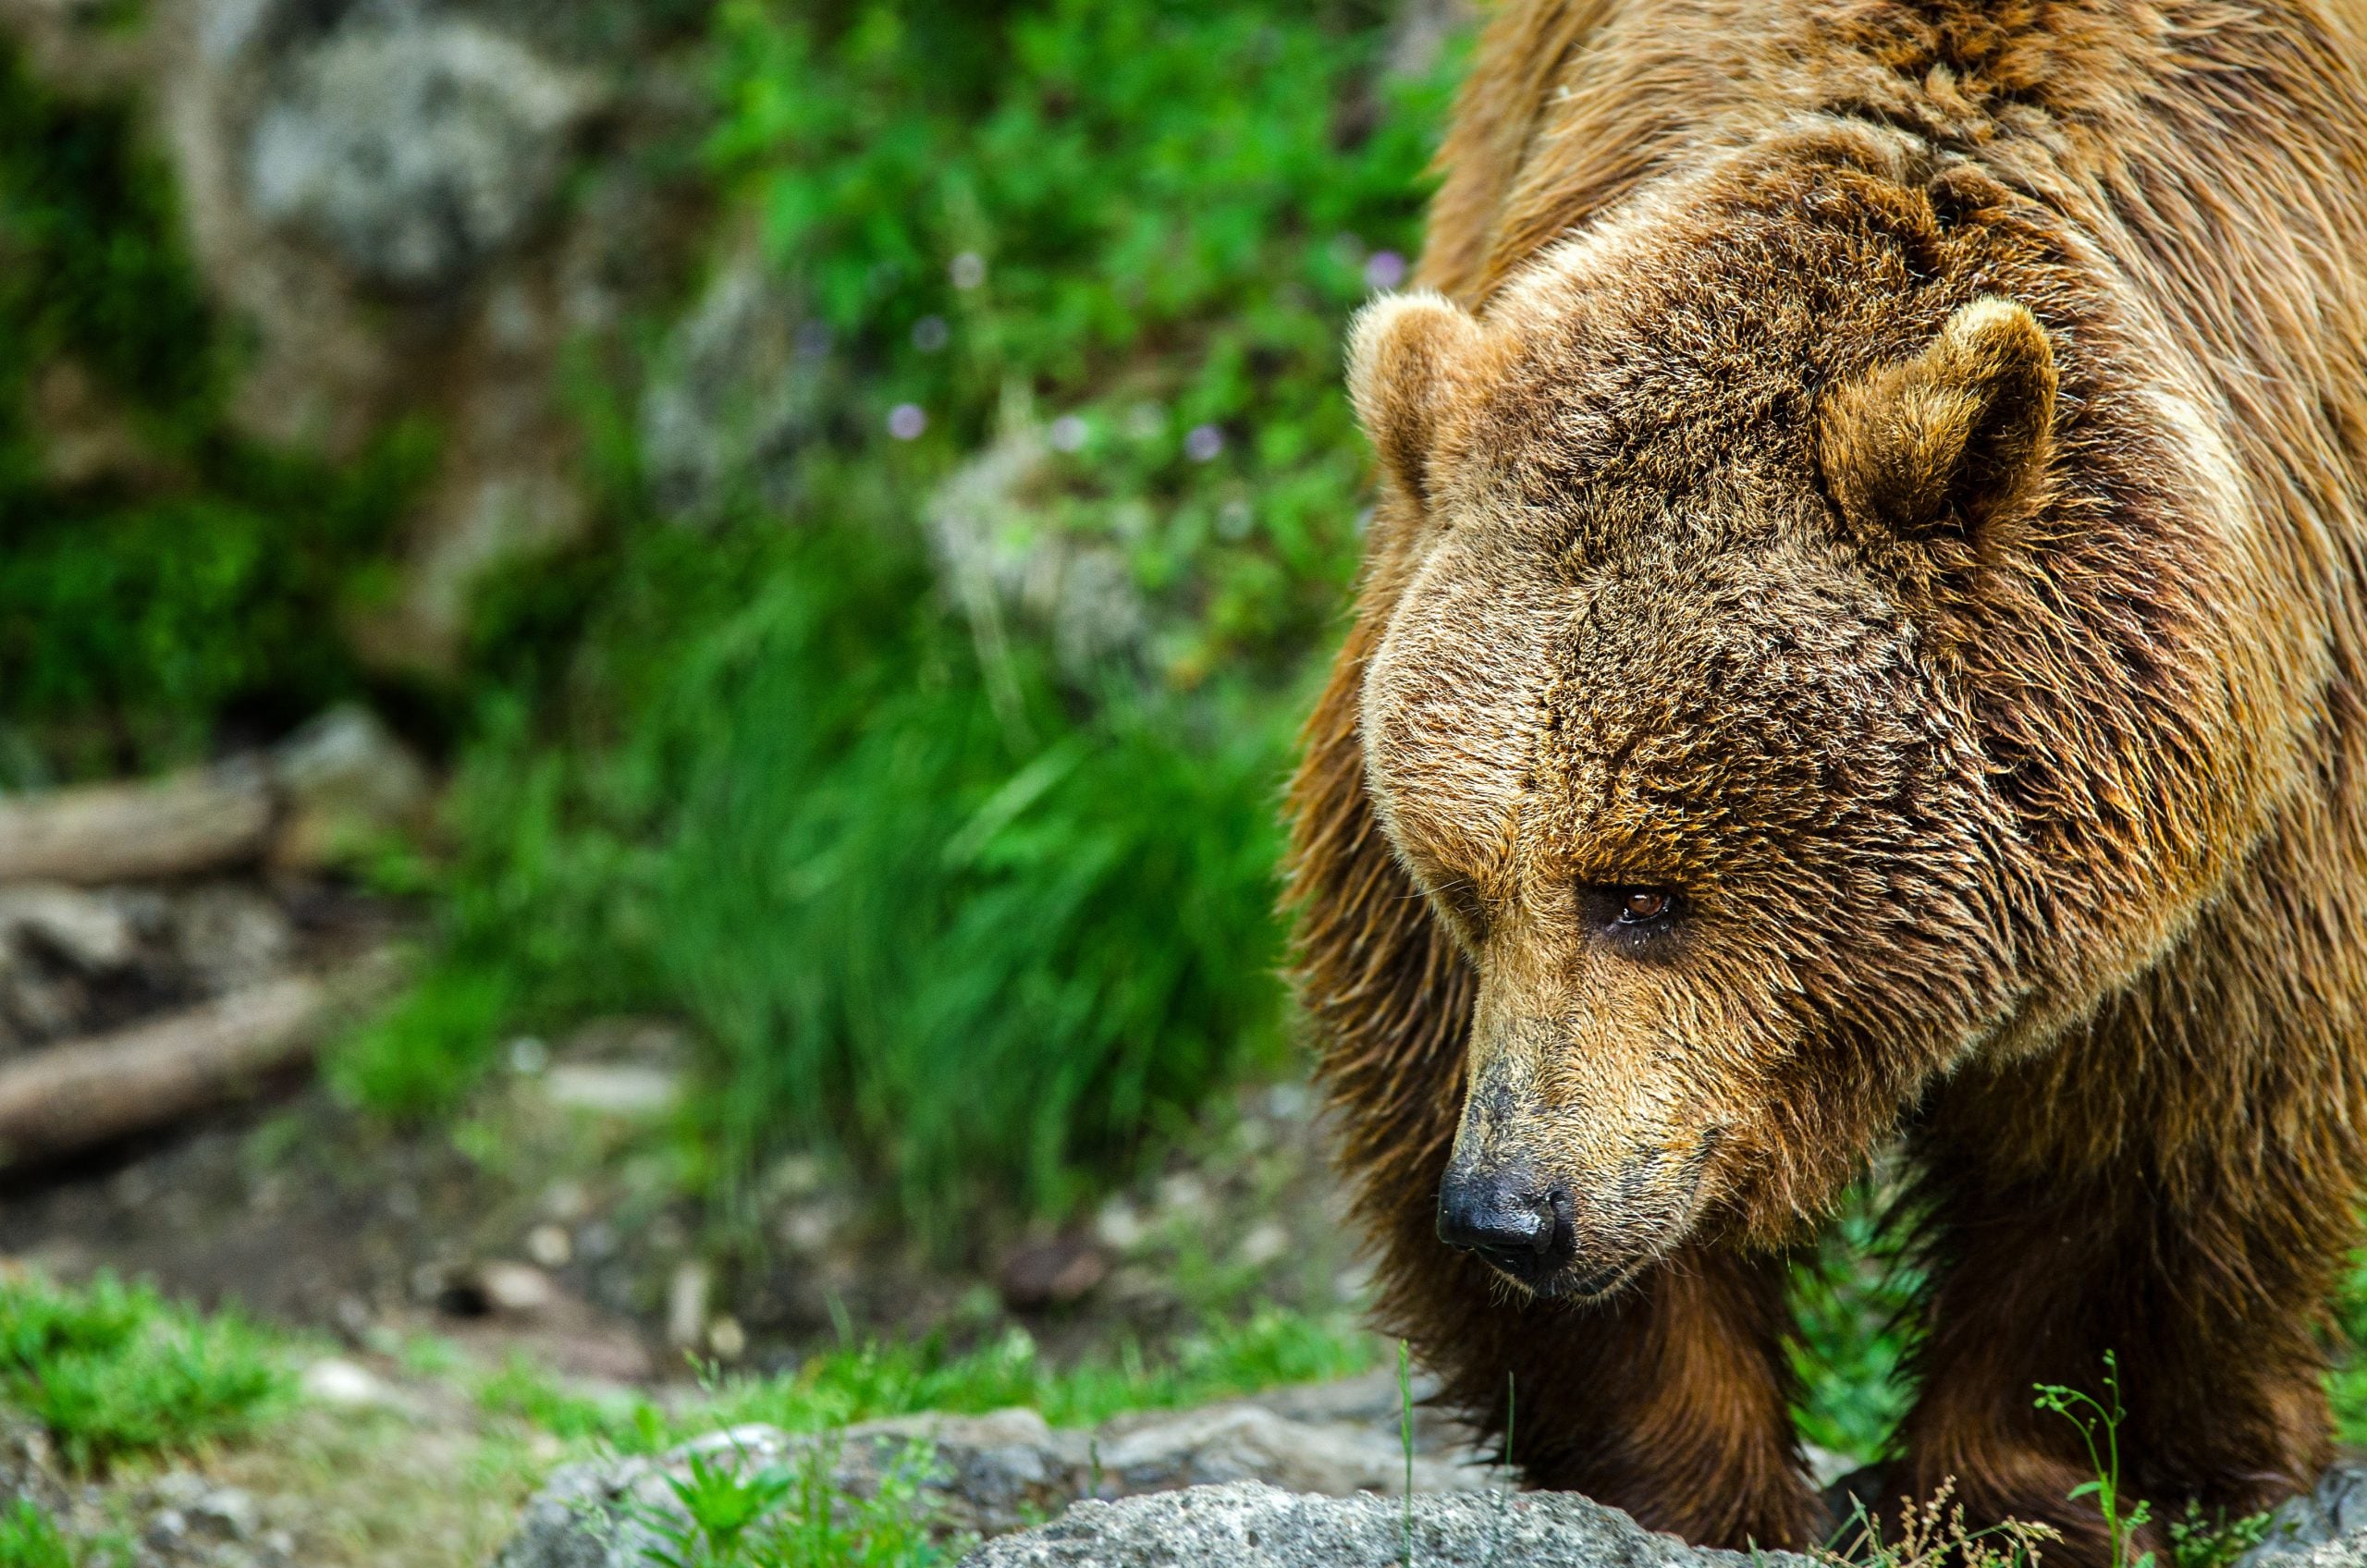 A Grizzly photo contest now open